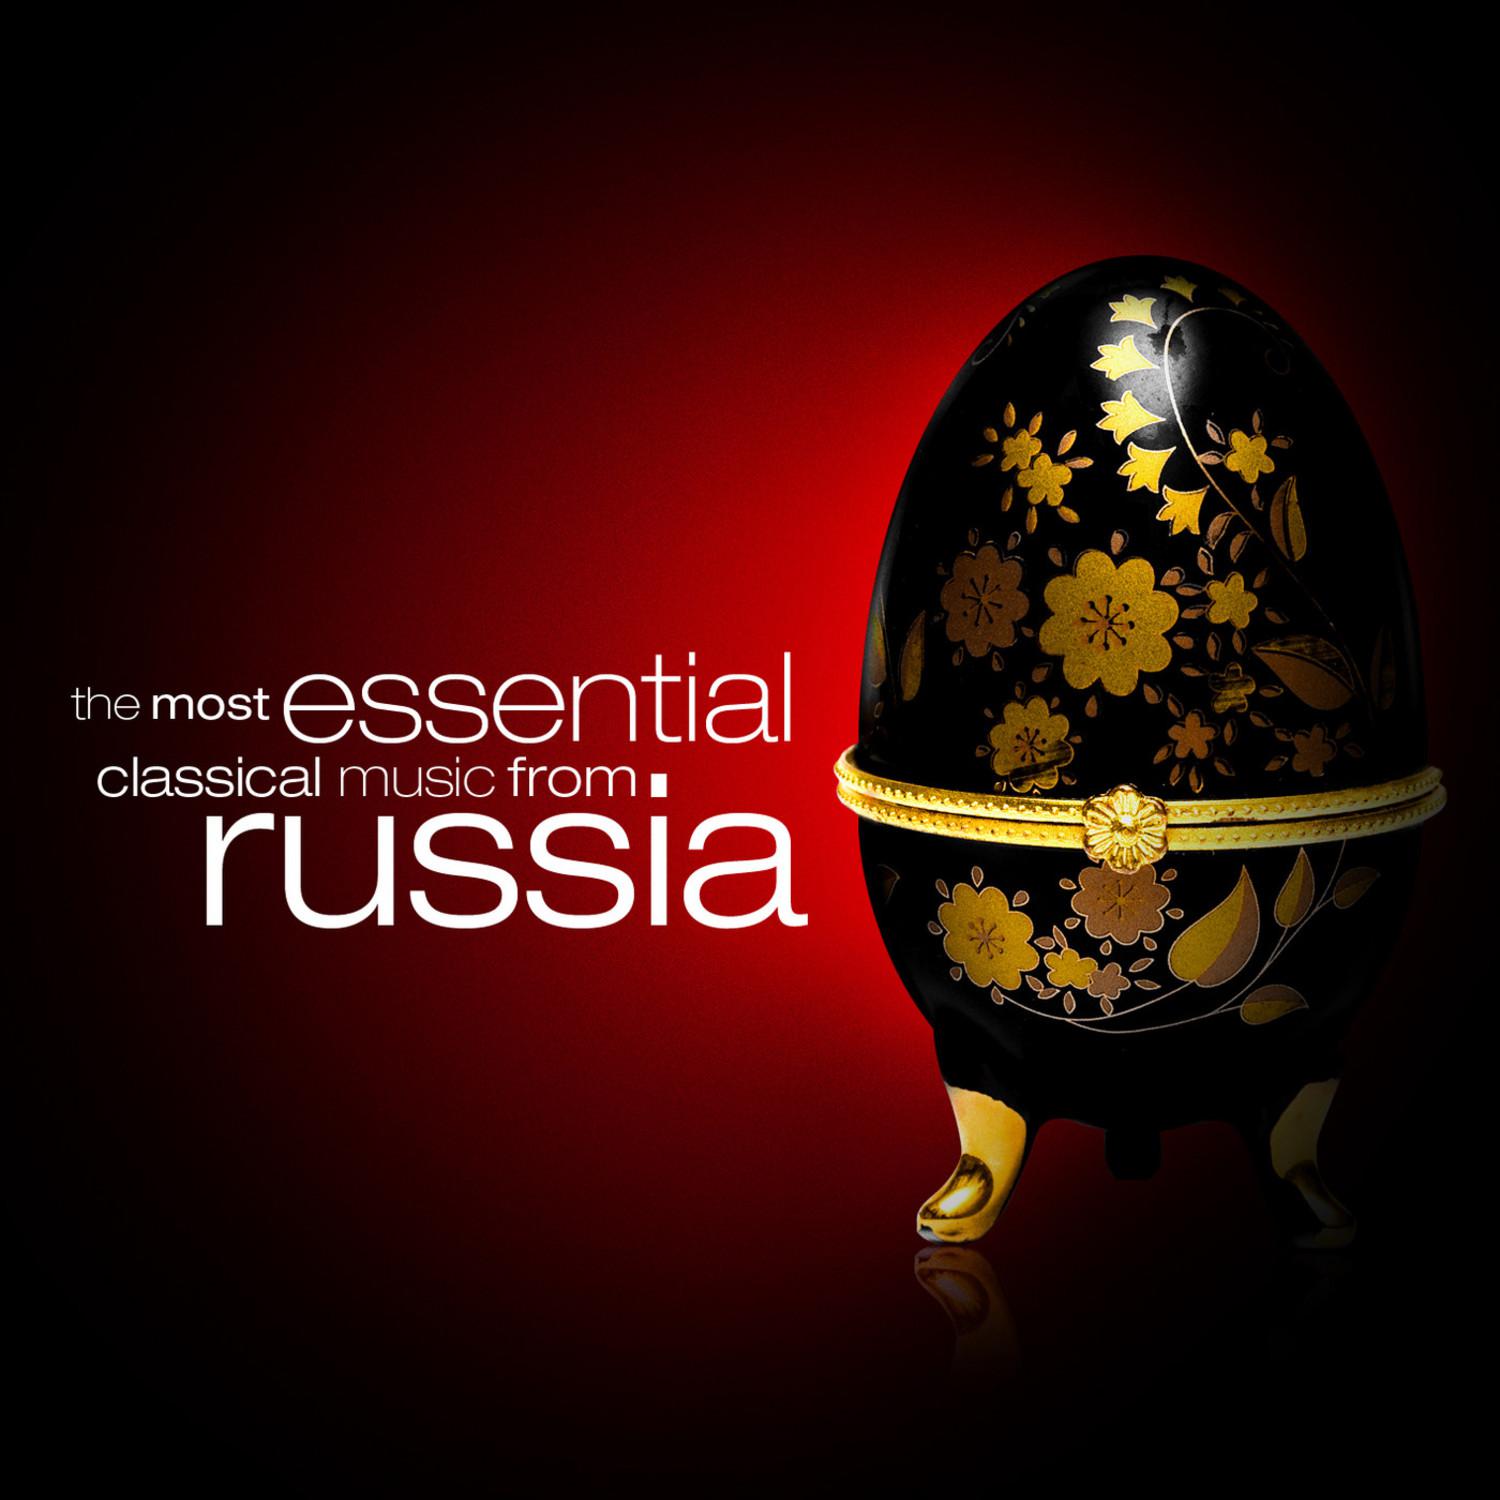 The Most Essential Classical Music from Russia